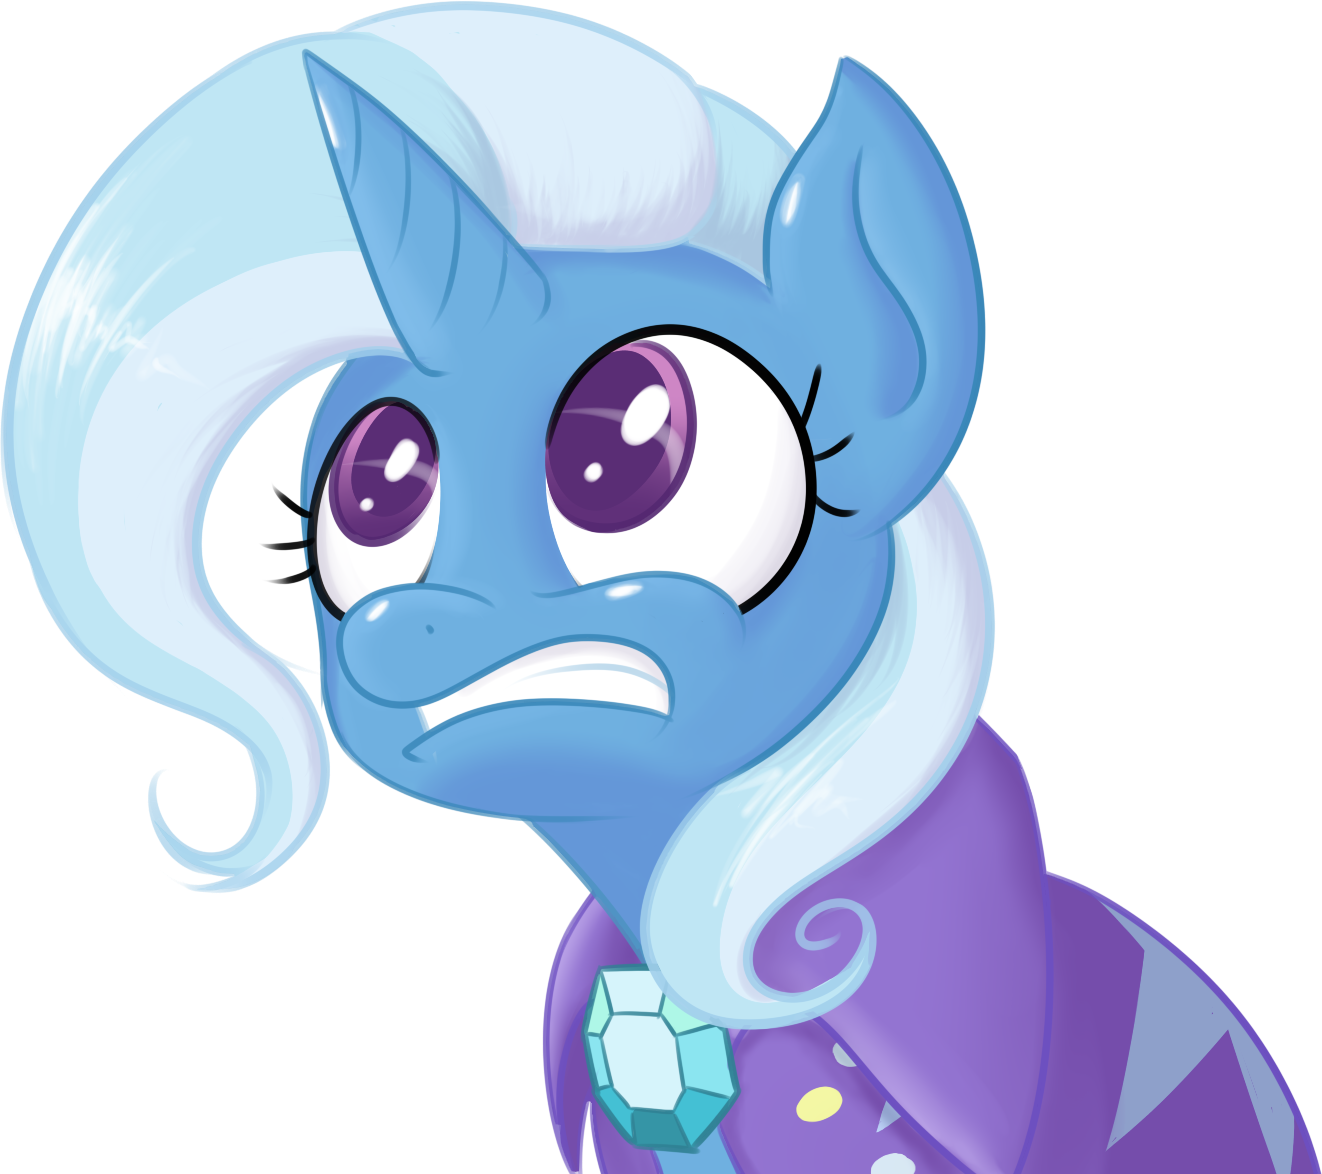 trixie_face_by_miketheuser-d5fiqh5.png